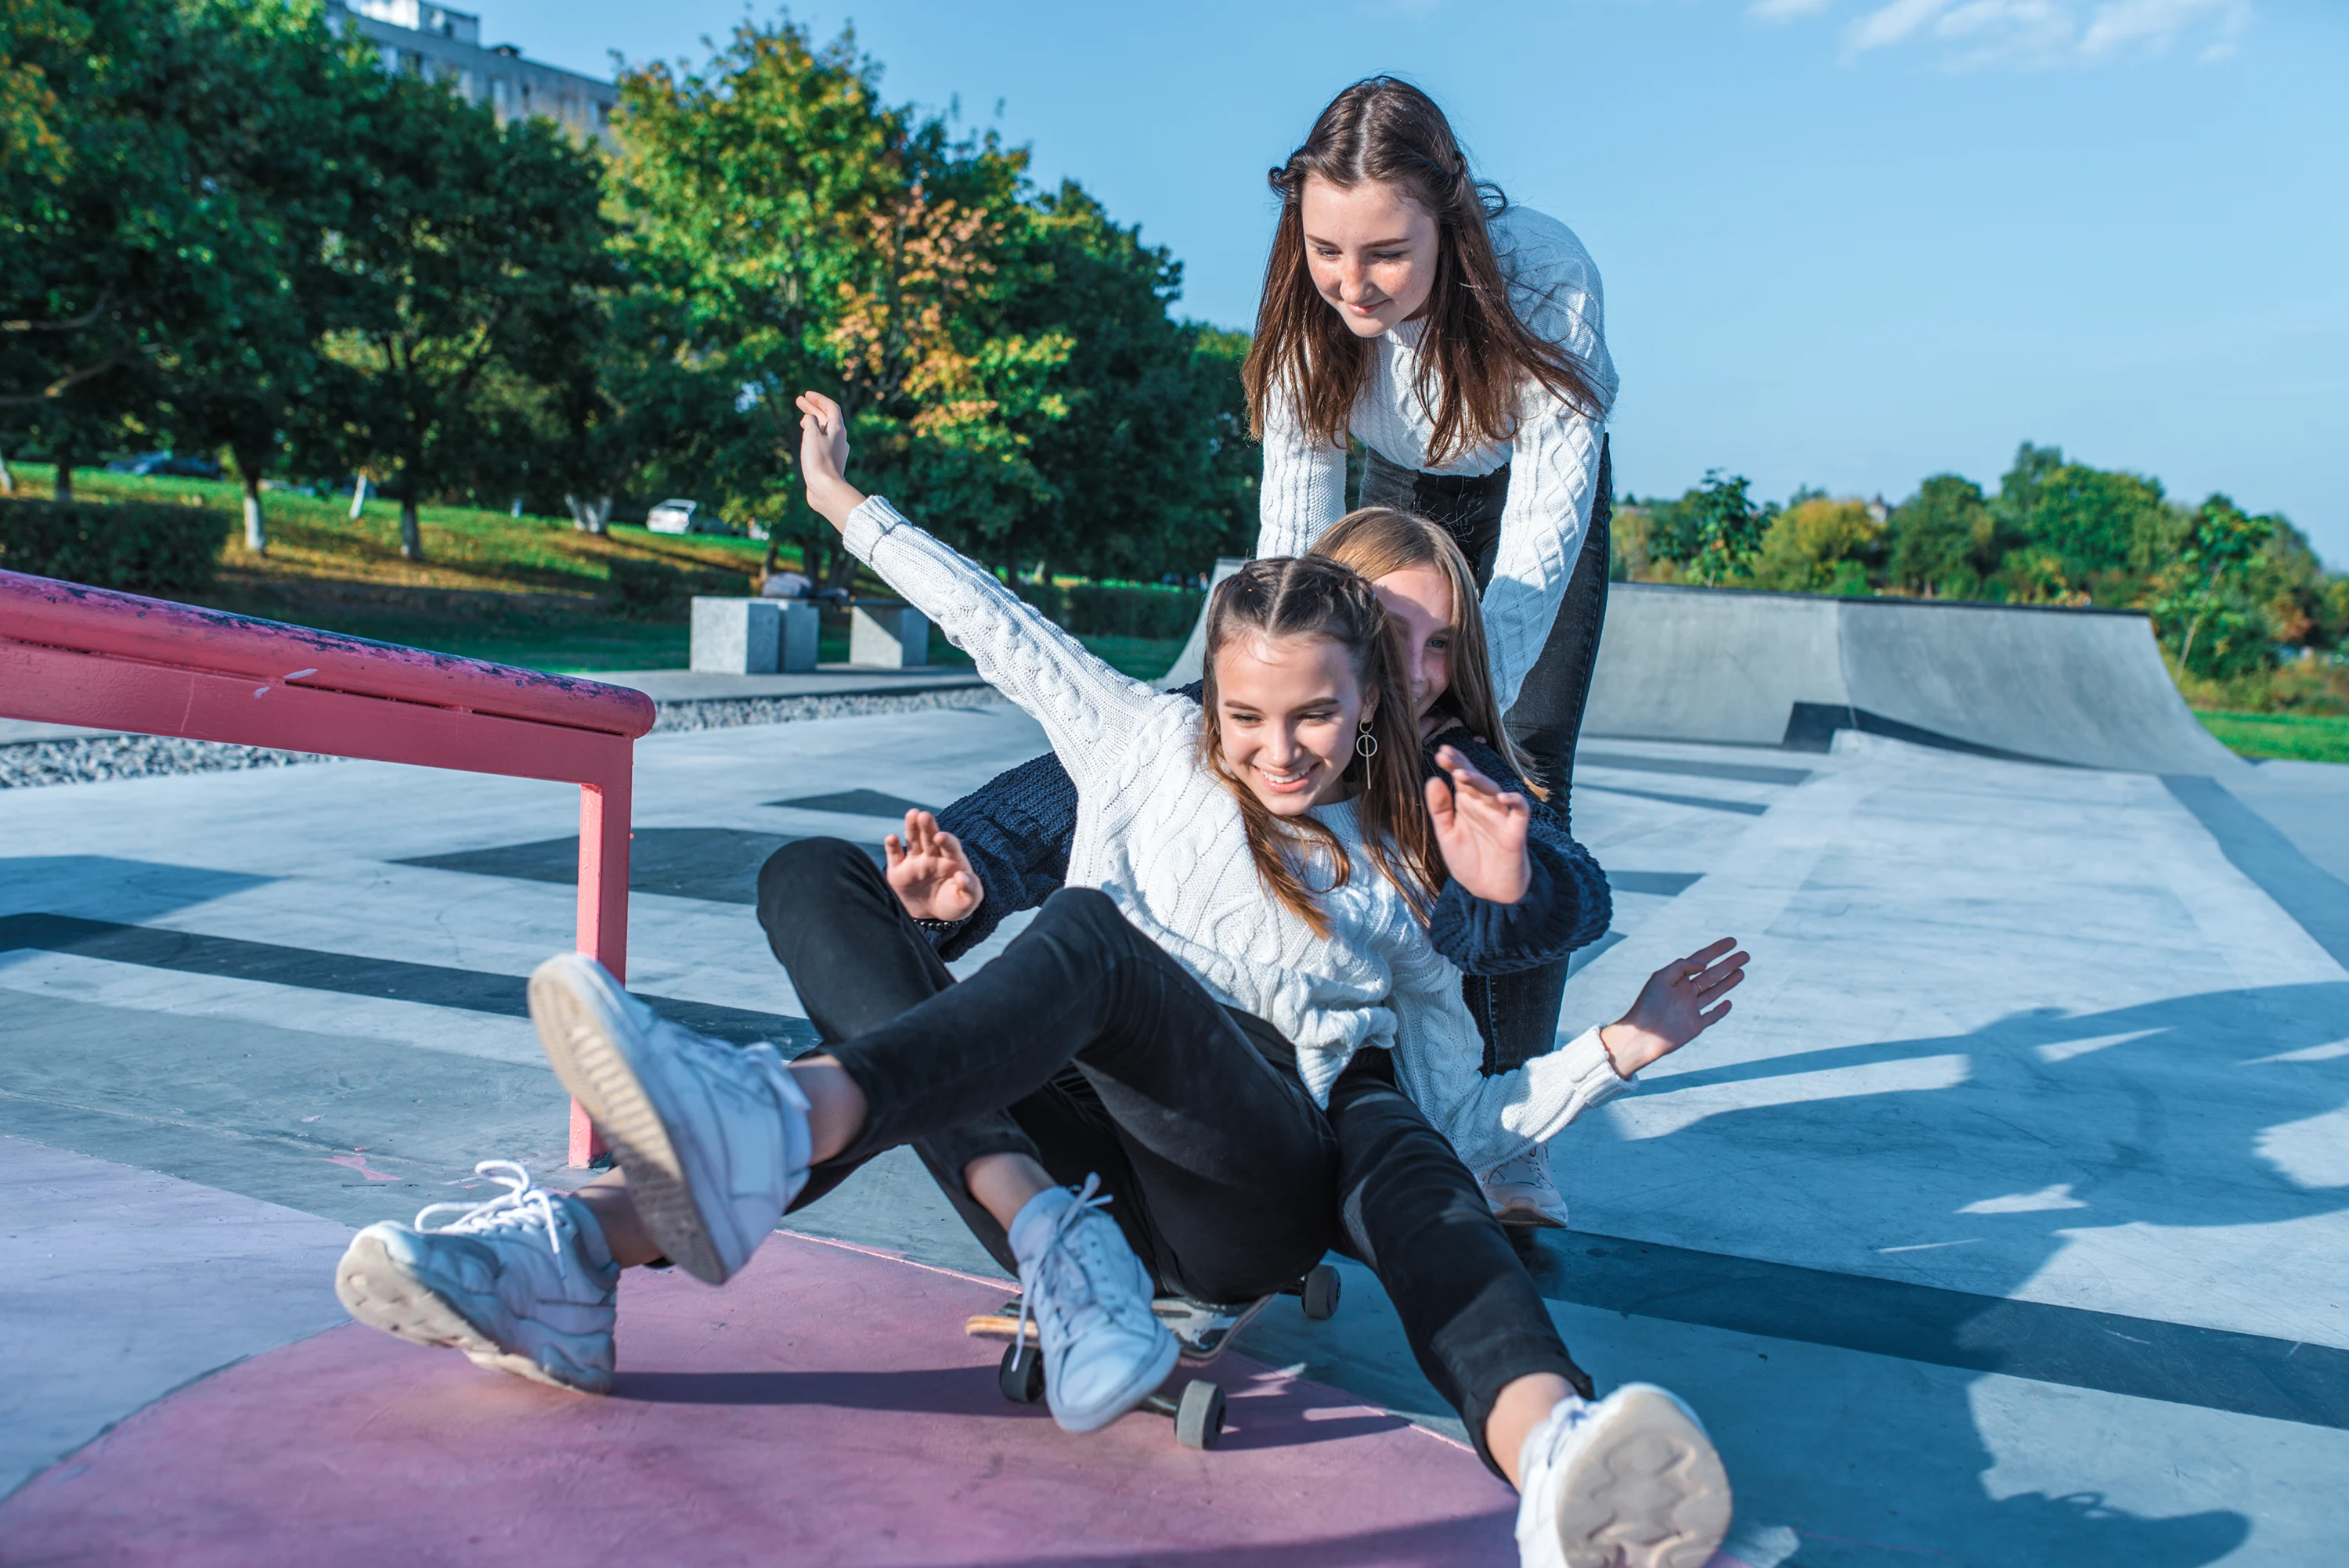 Girls sitting on a skateboard and riding it